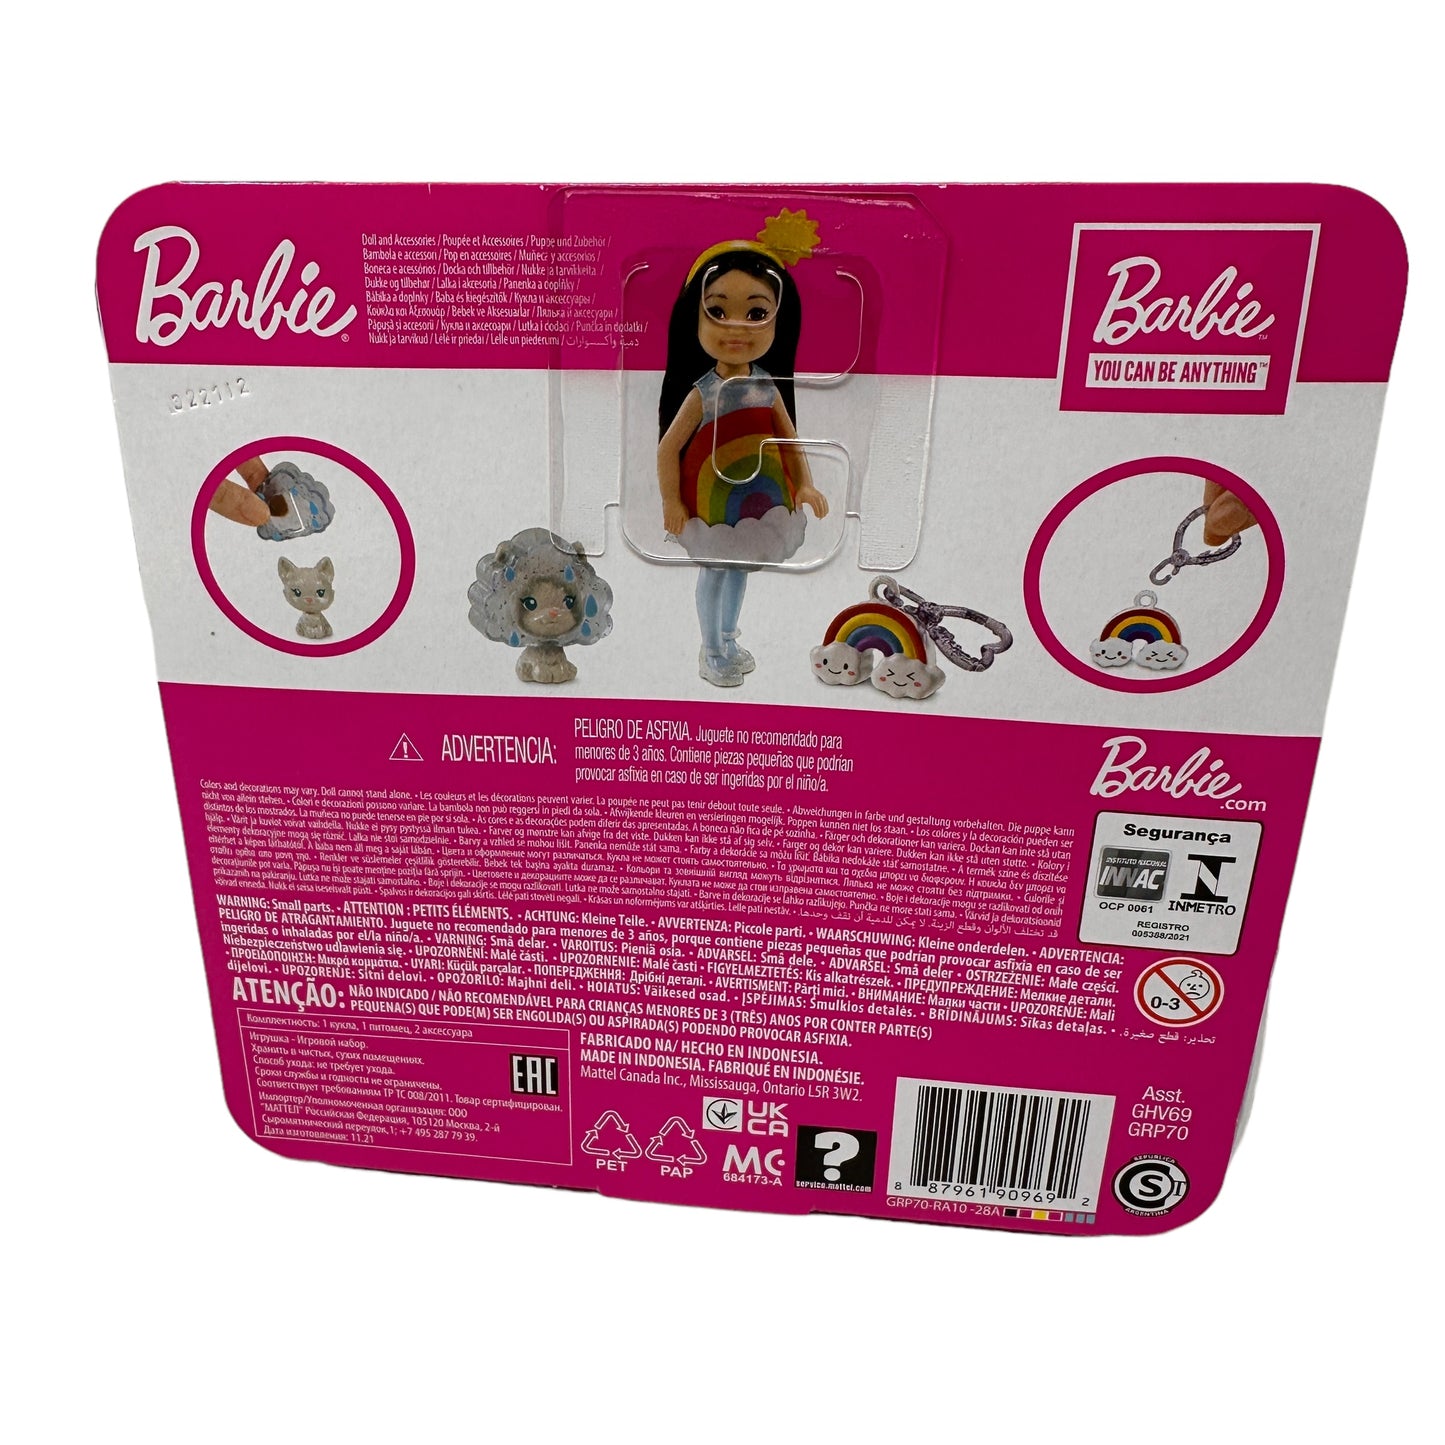 Case Pack of 6 - Mattel Barbie Chelsea Doll with Dog and Costume